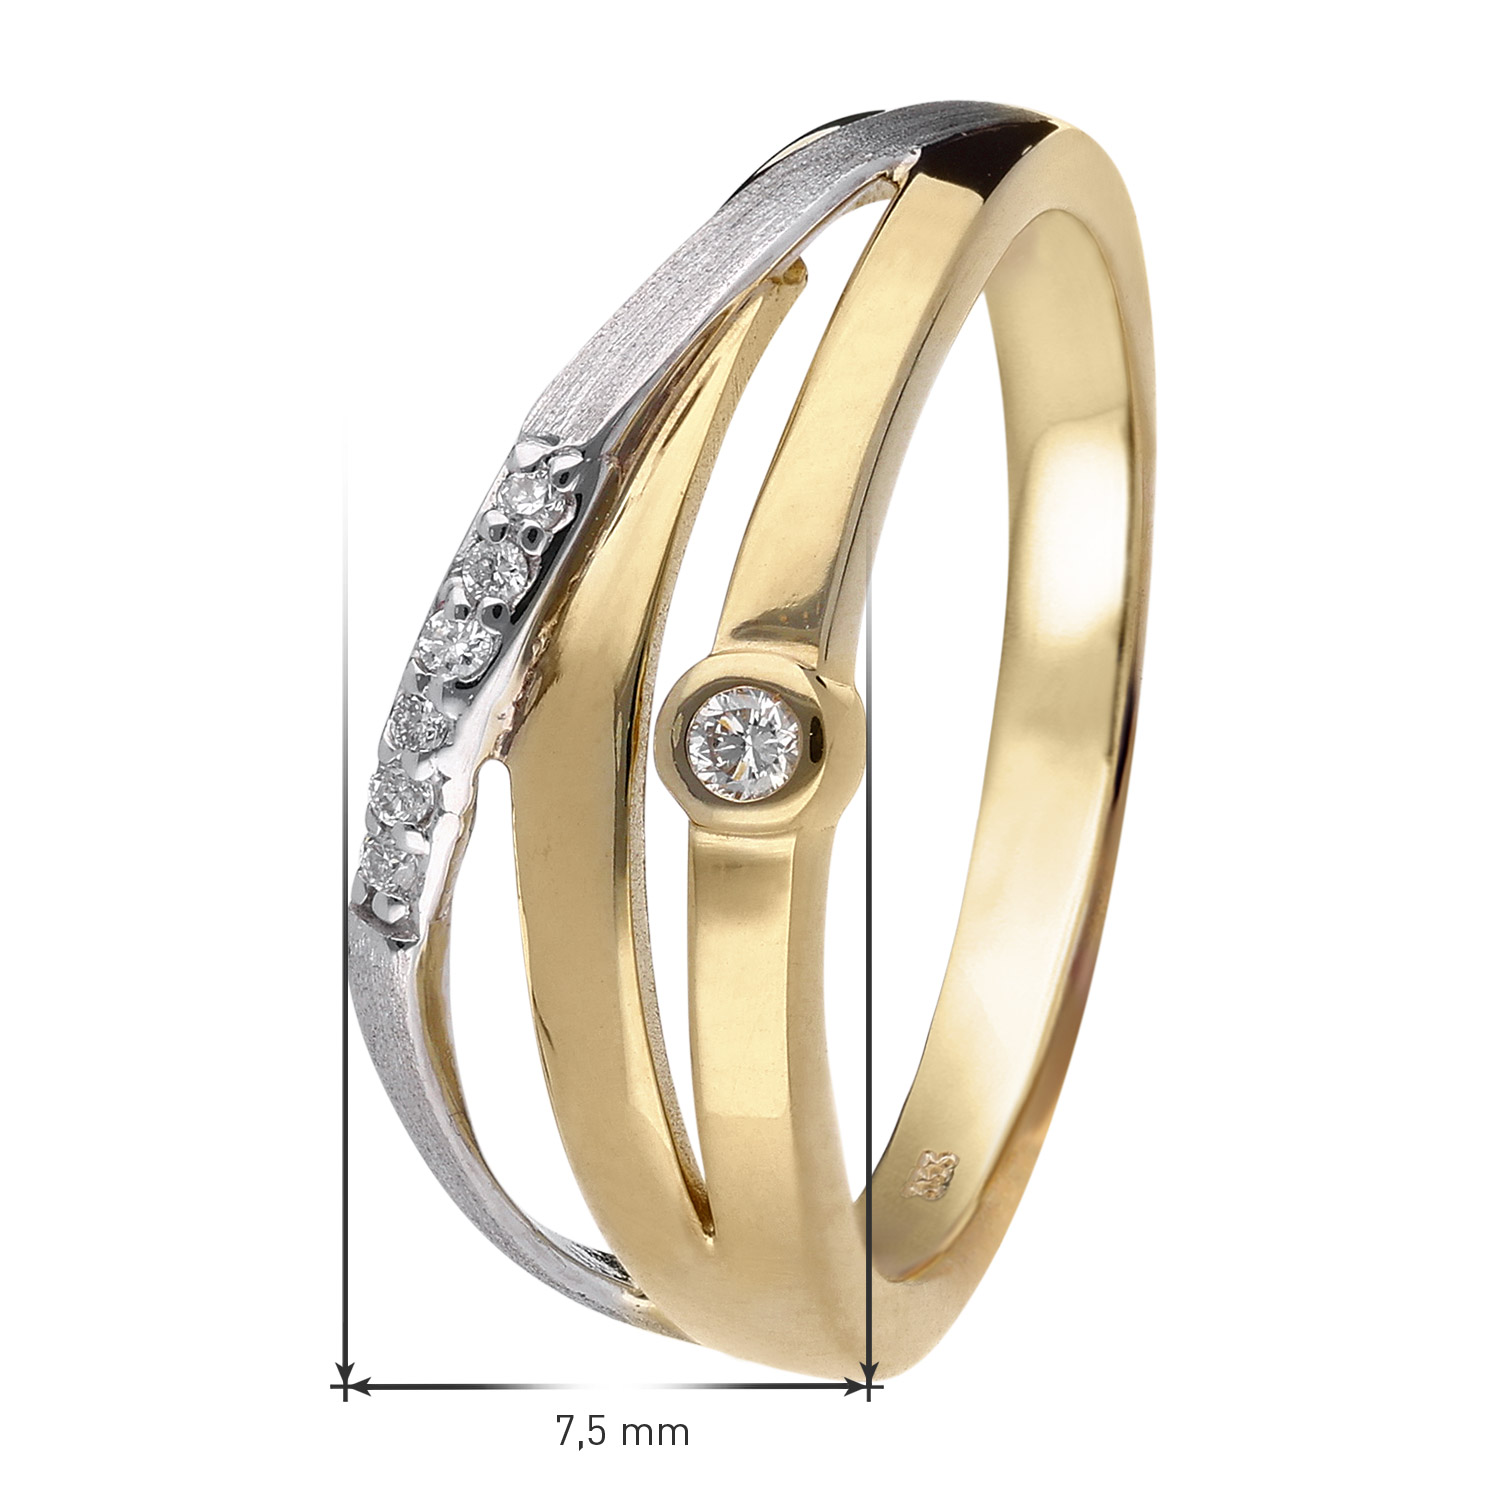 trendor Ladies\' Ring with Diamonds Gold 333/8K Two-Tone 15577 • uhrcenter